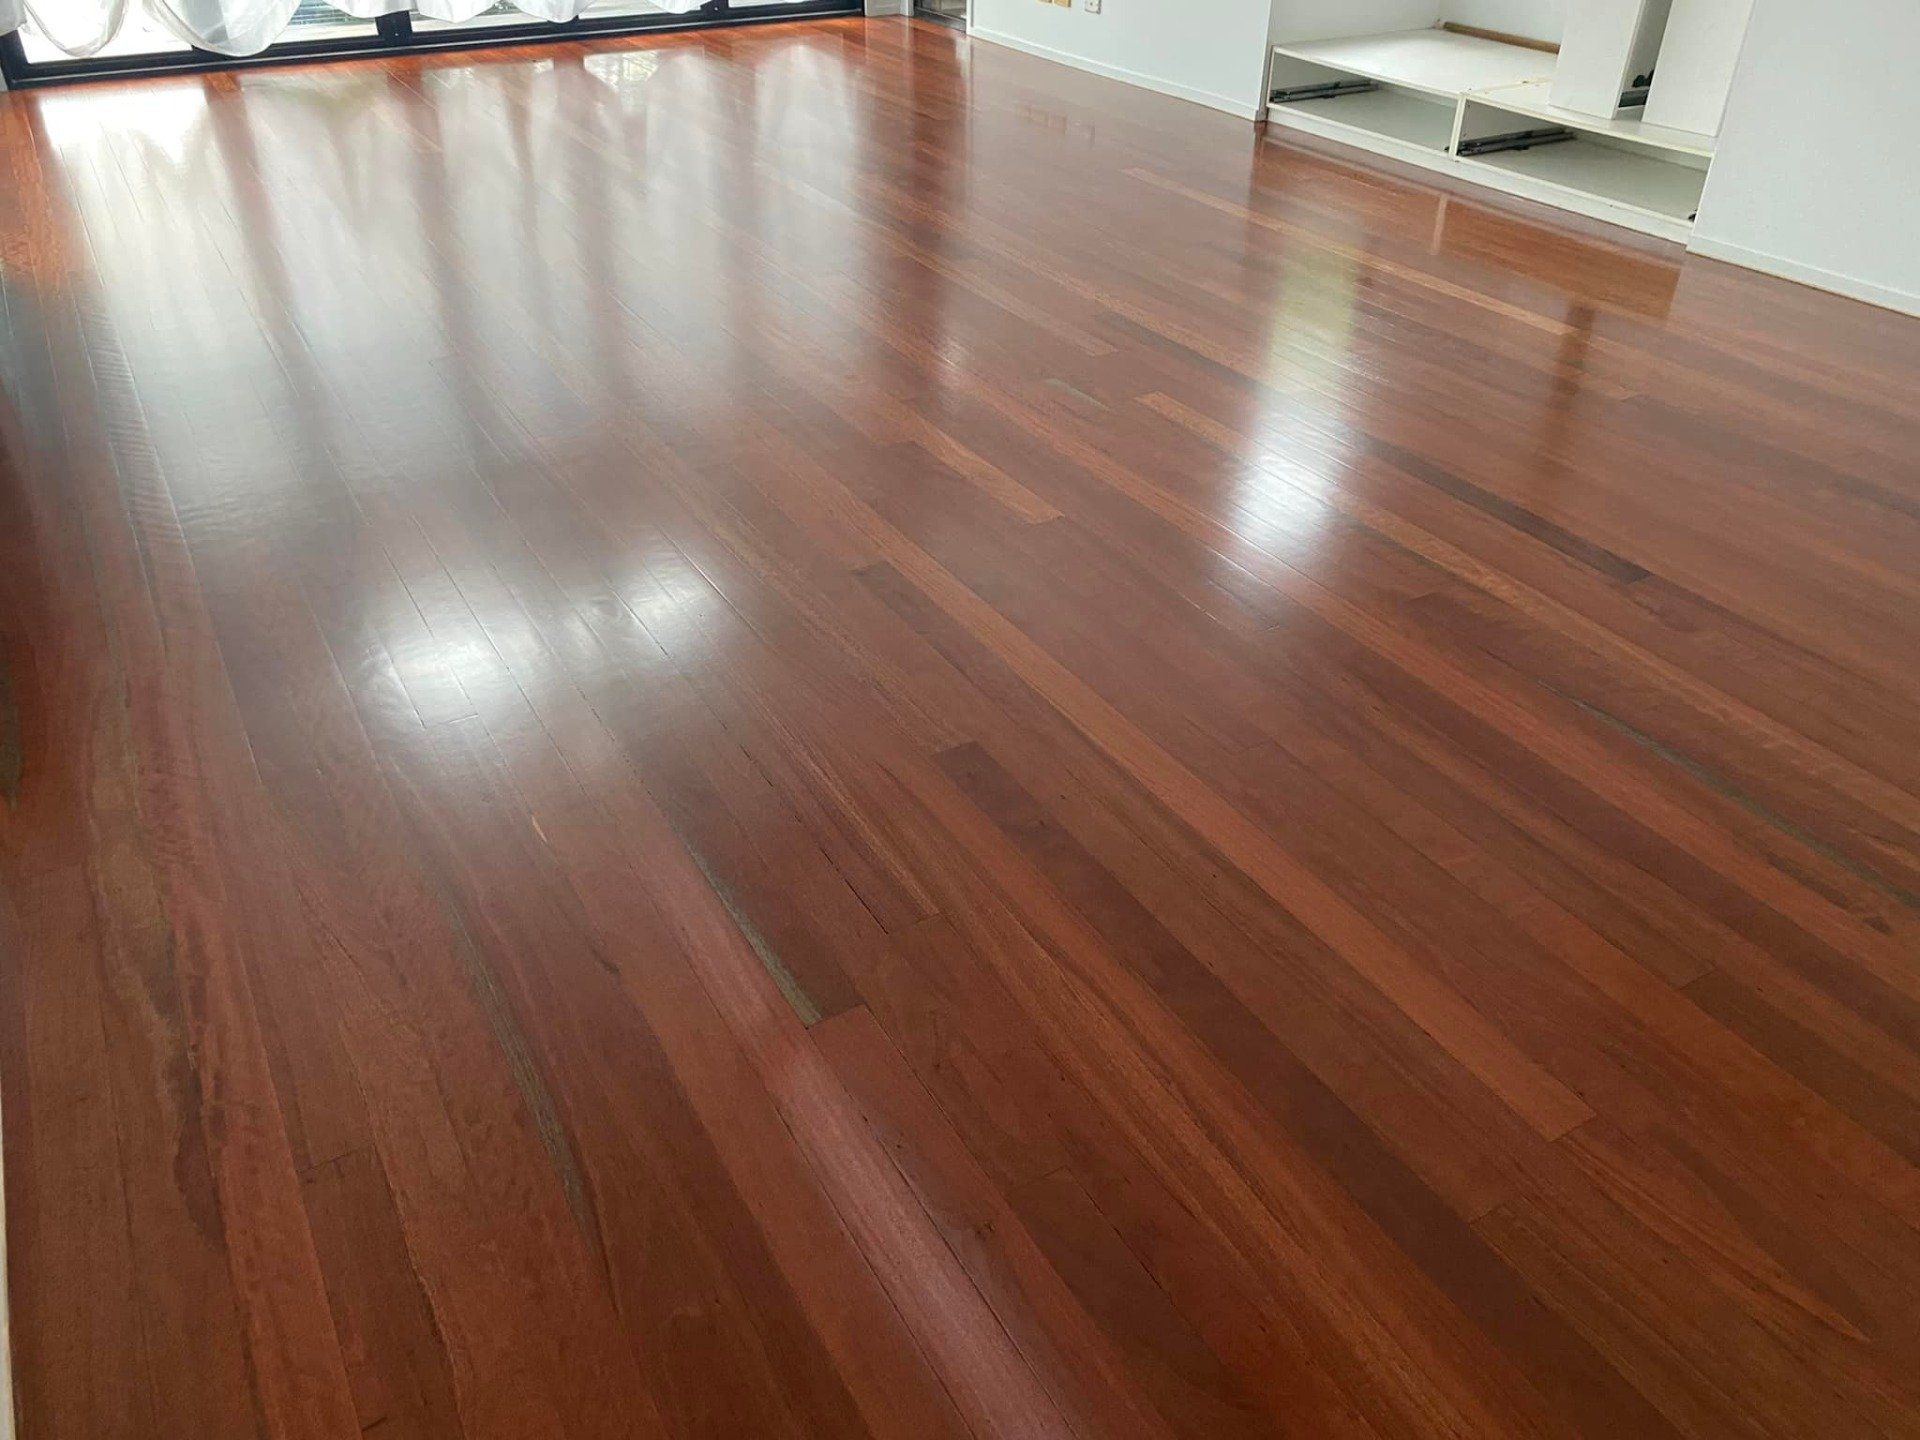 After Polishing Of Wooden Floor | Cairns, QLD | AJ’s Cleaning & Floor Sanding